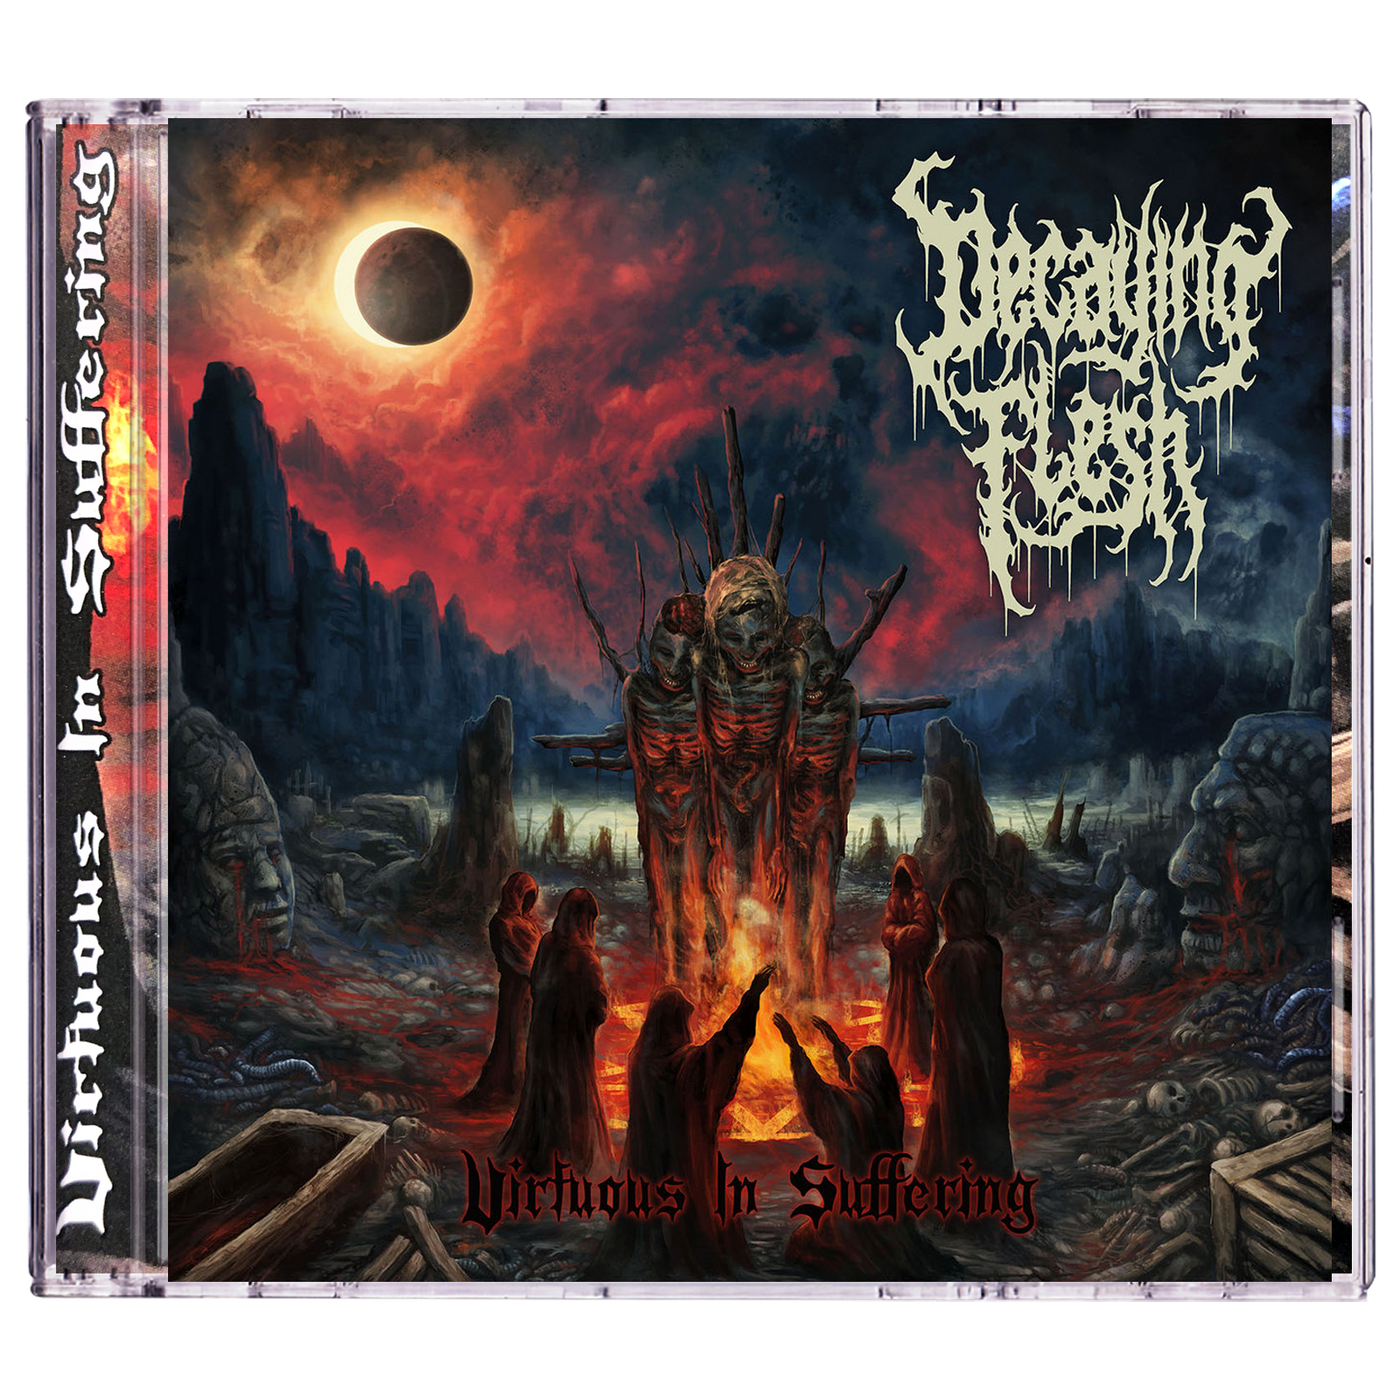 Decaying Flesh 'Virtuous In Suffering' CD